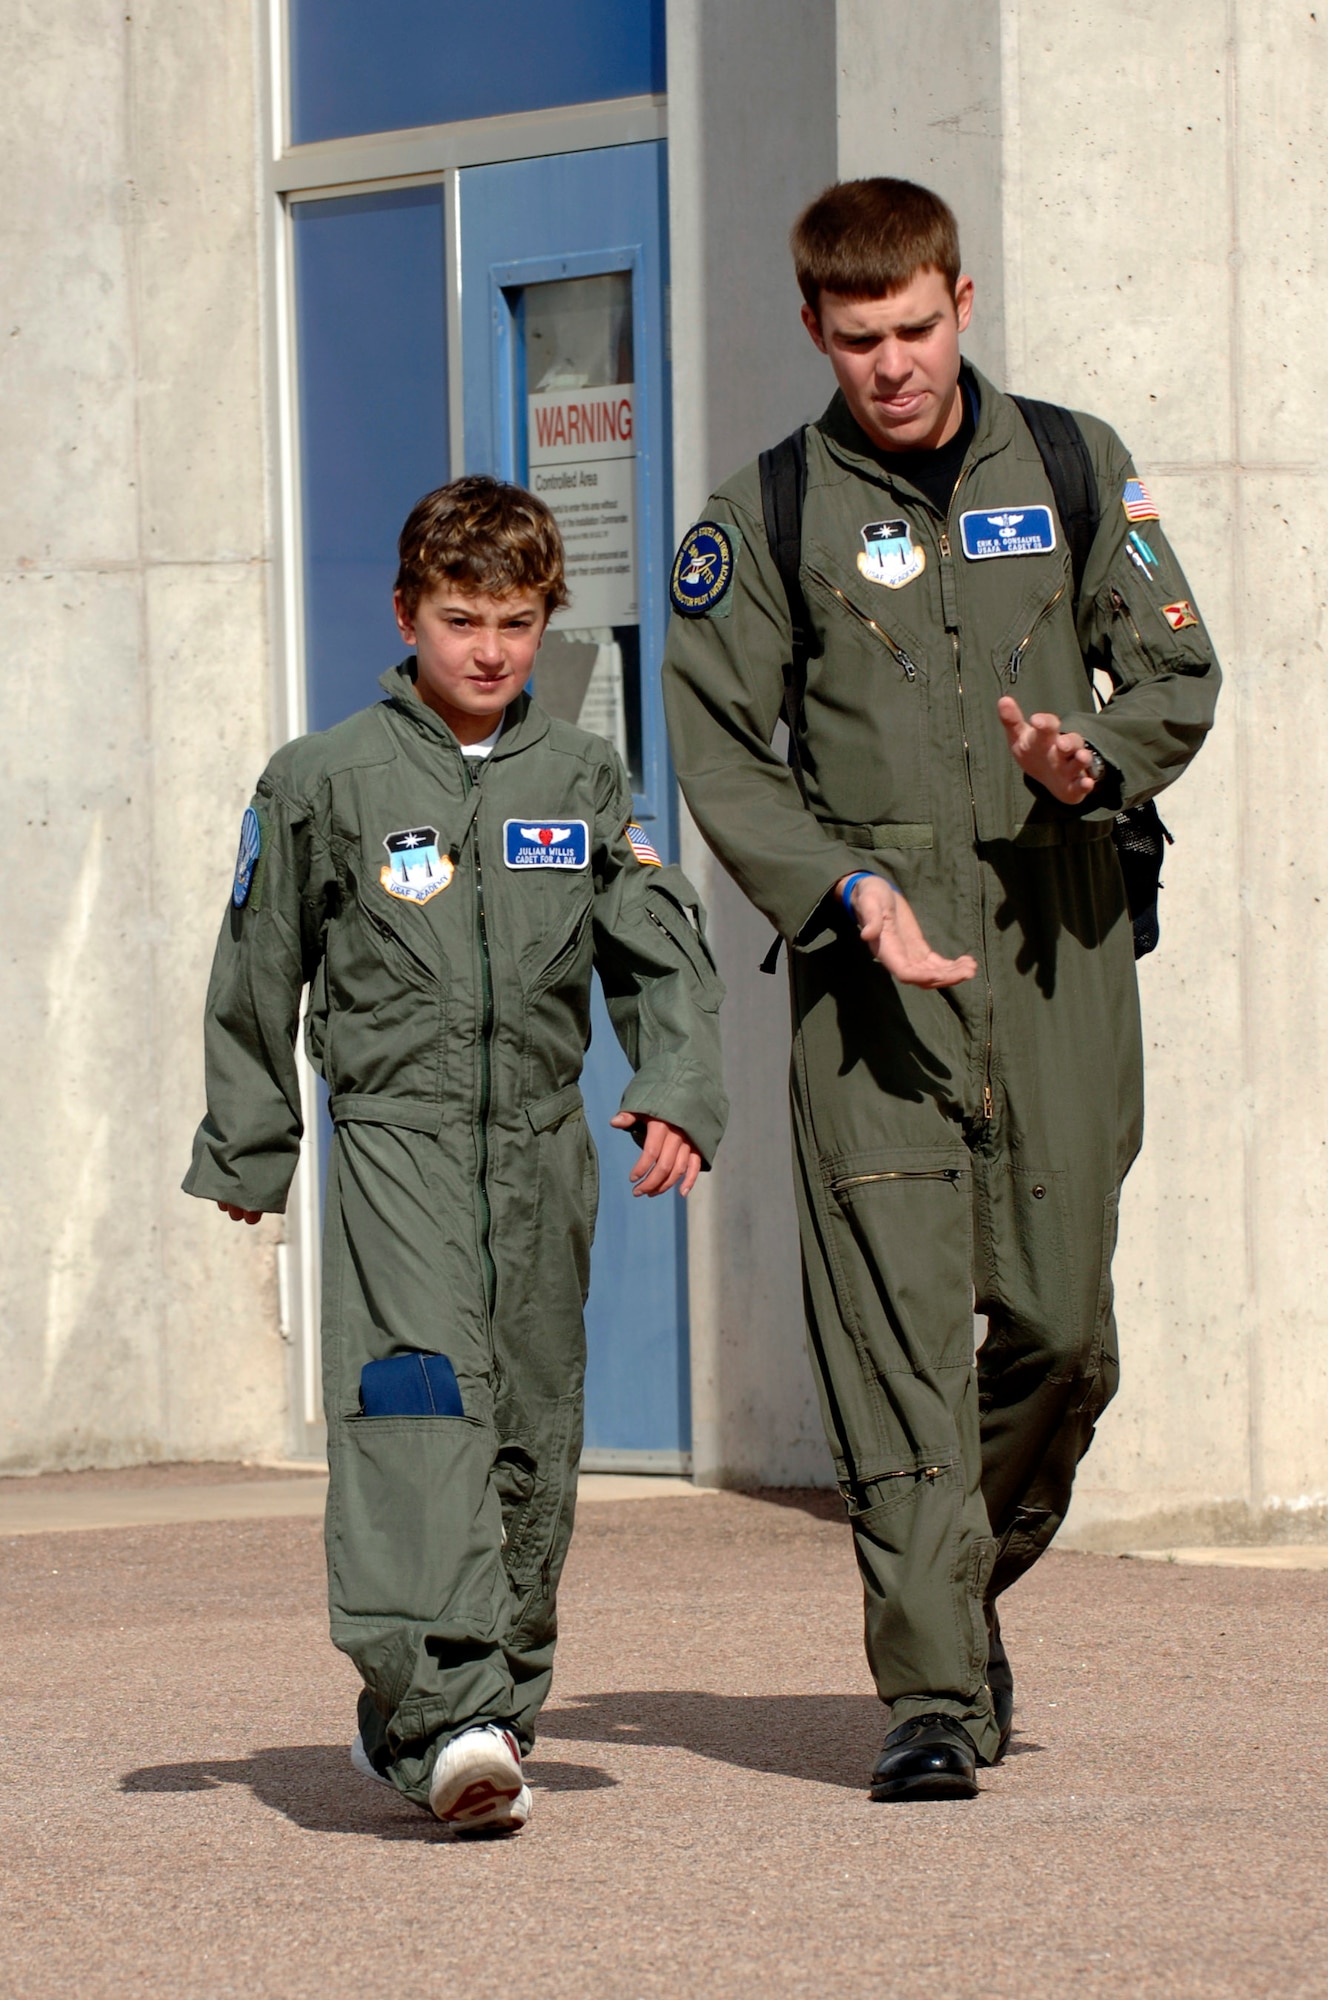 Ten-year-old Julian Willis walks with sophomore cadet Erik Gonsalves after taking a tour of the glider hangar at the U.S. Air Force Academy, Colo. The Make-a-Wish Foundation and the Air Force Academy made Julian a "Cadet for a Day". Cadets have sponsored 22 children since the program started in 2000. (U.S. Air Force photo/Mike Kaplan)